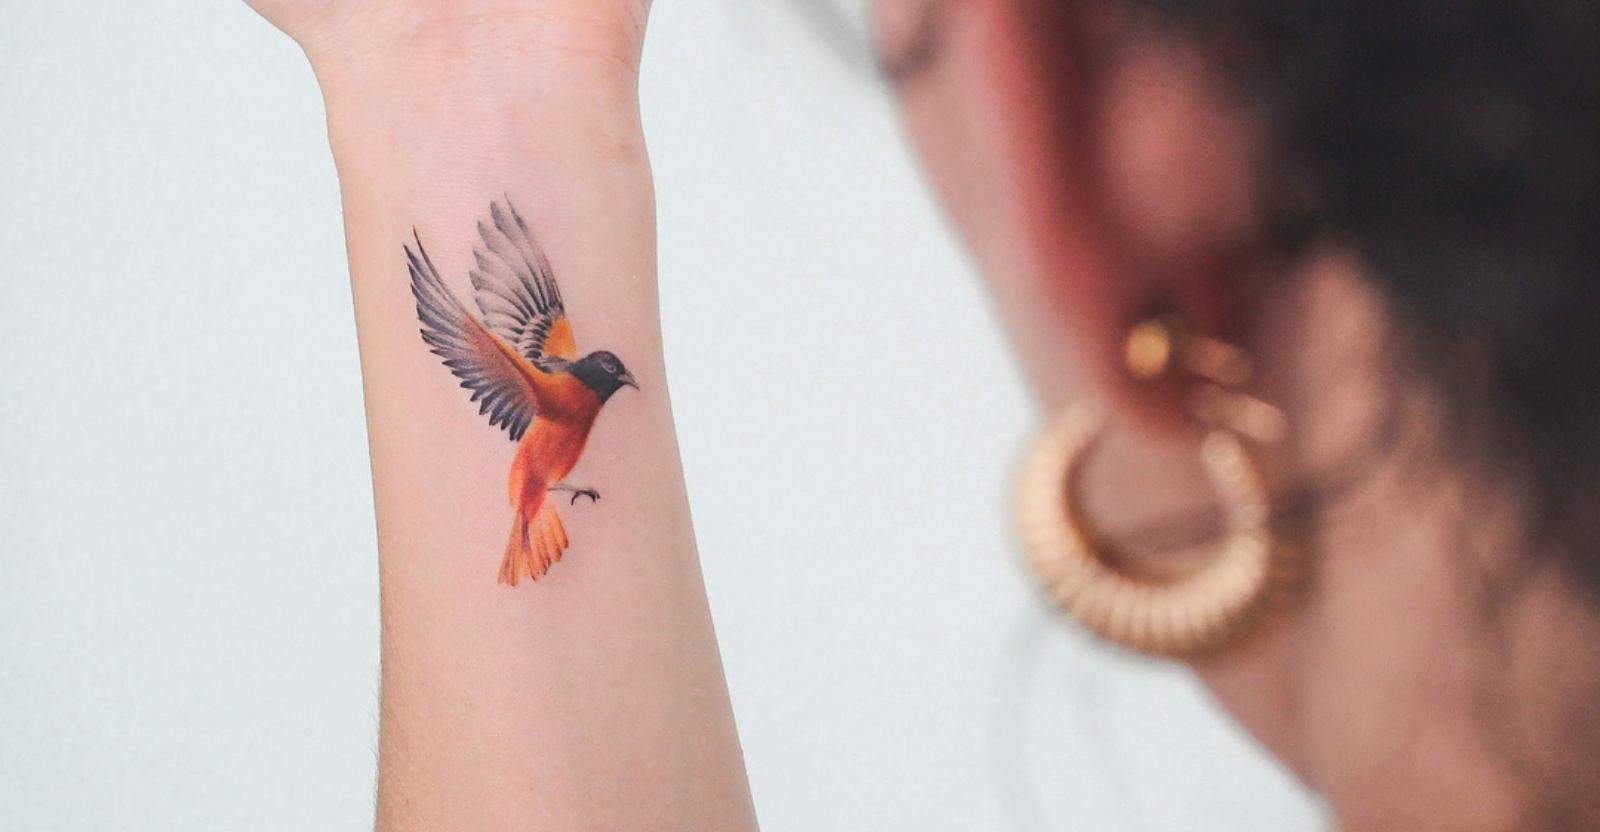 Bird Tattoos for Women + Their Special Meaning - TattooGlee | Bird tattoos  for women, Bird shoulder tattoos, Tattoos for women